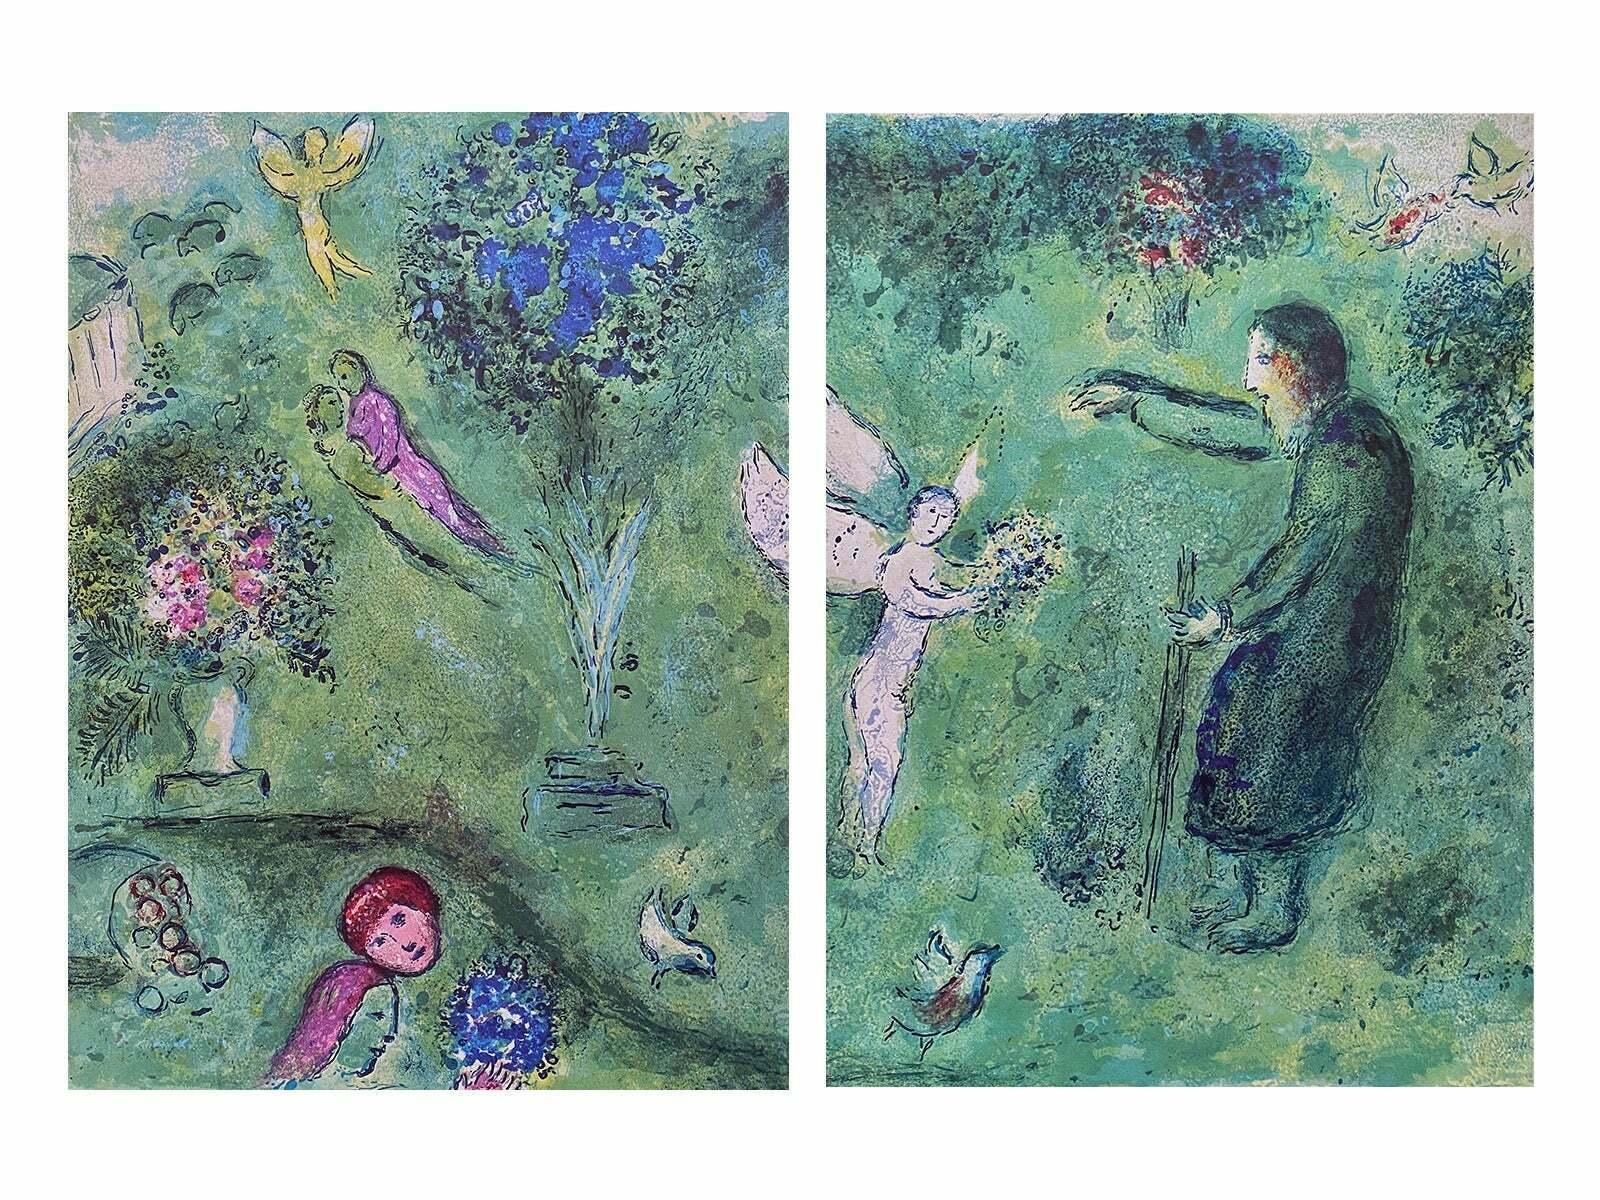 MARC CHAGALL (1897-1985) Russian-Jewish painter is recognized as one of the most significant painters and graphic artists of his time. Chagall painted in a style all his own, combining elements of Expressionism, Symbolism, Cubism and, to a lesser